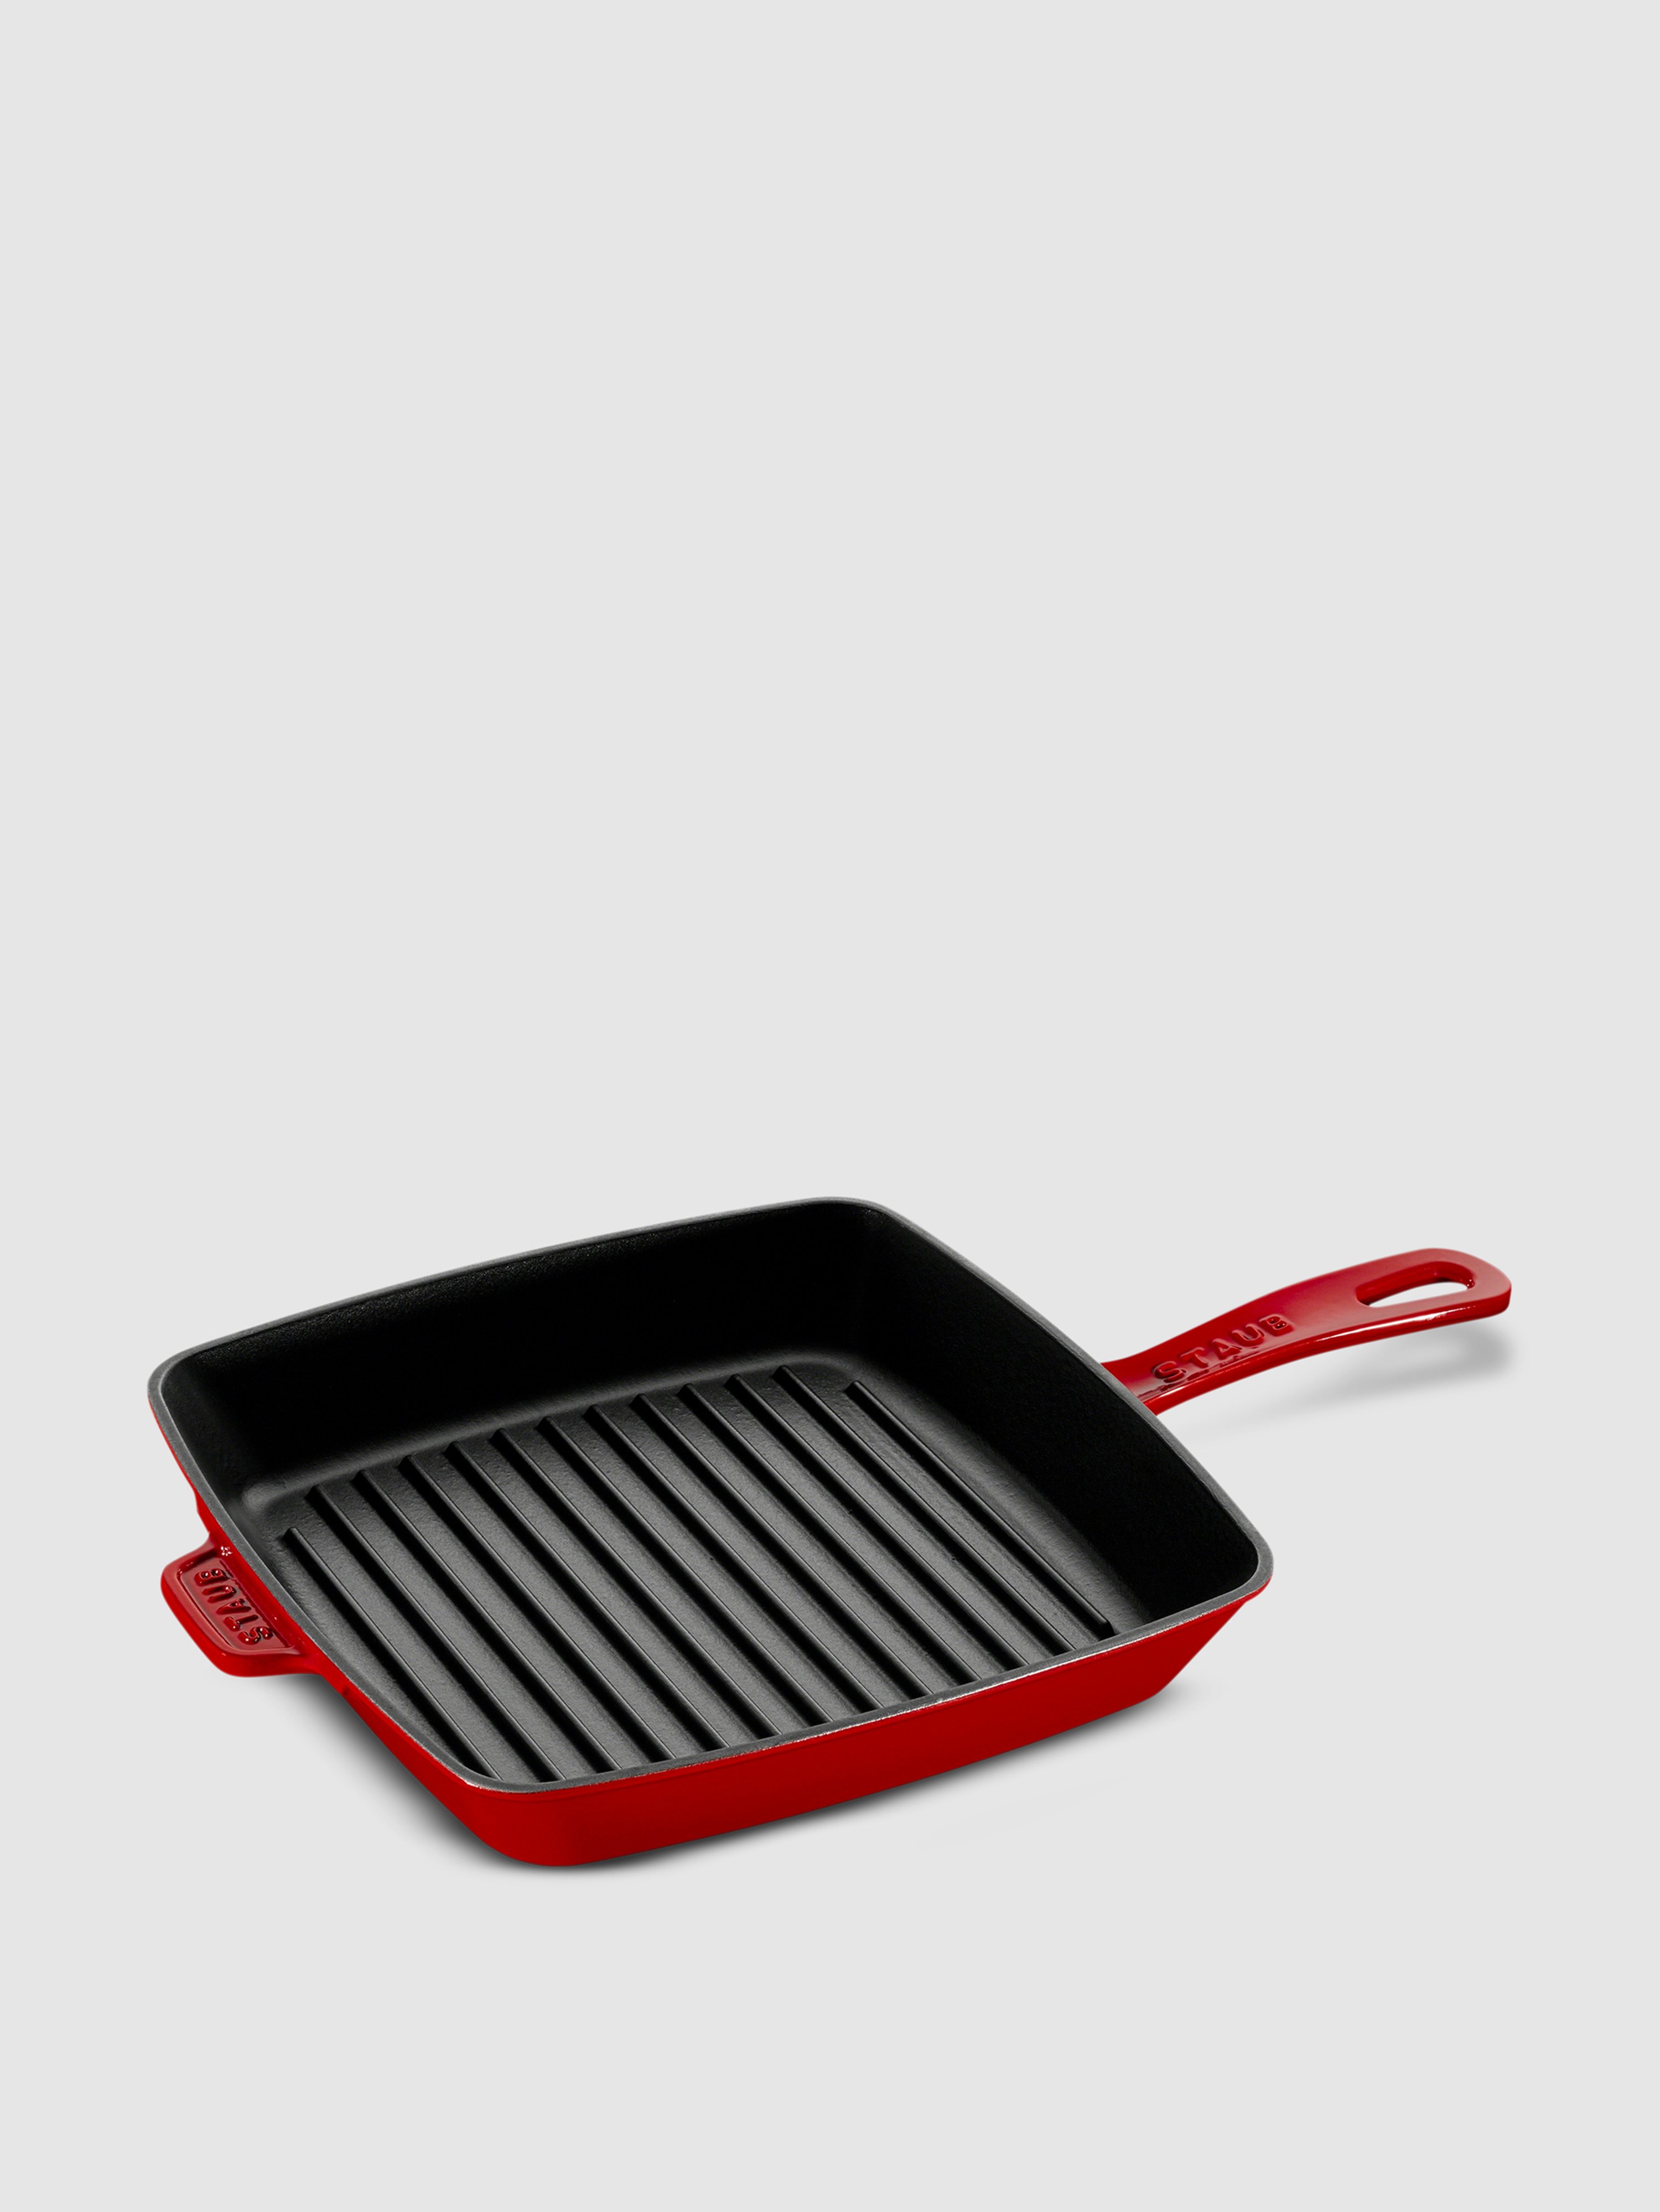 Staub Square Grill Pan In Cherry